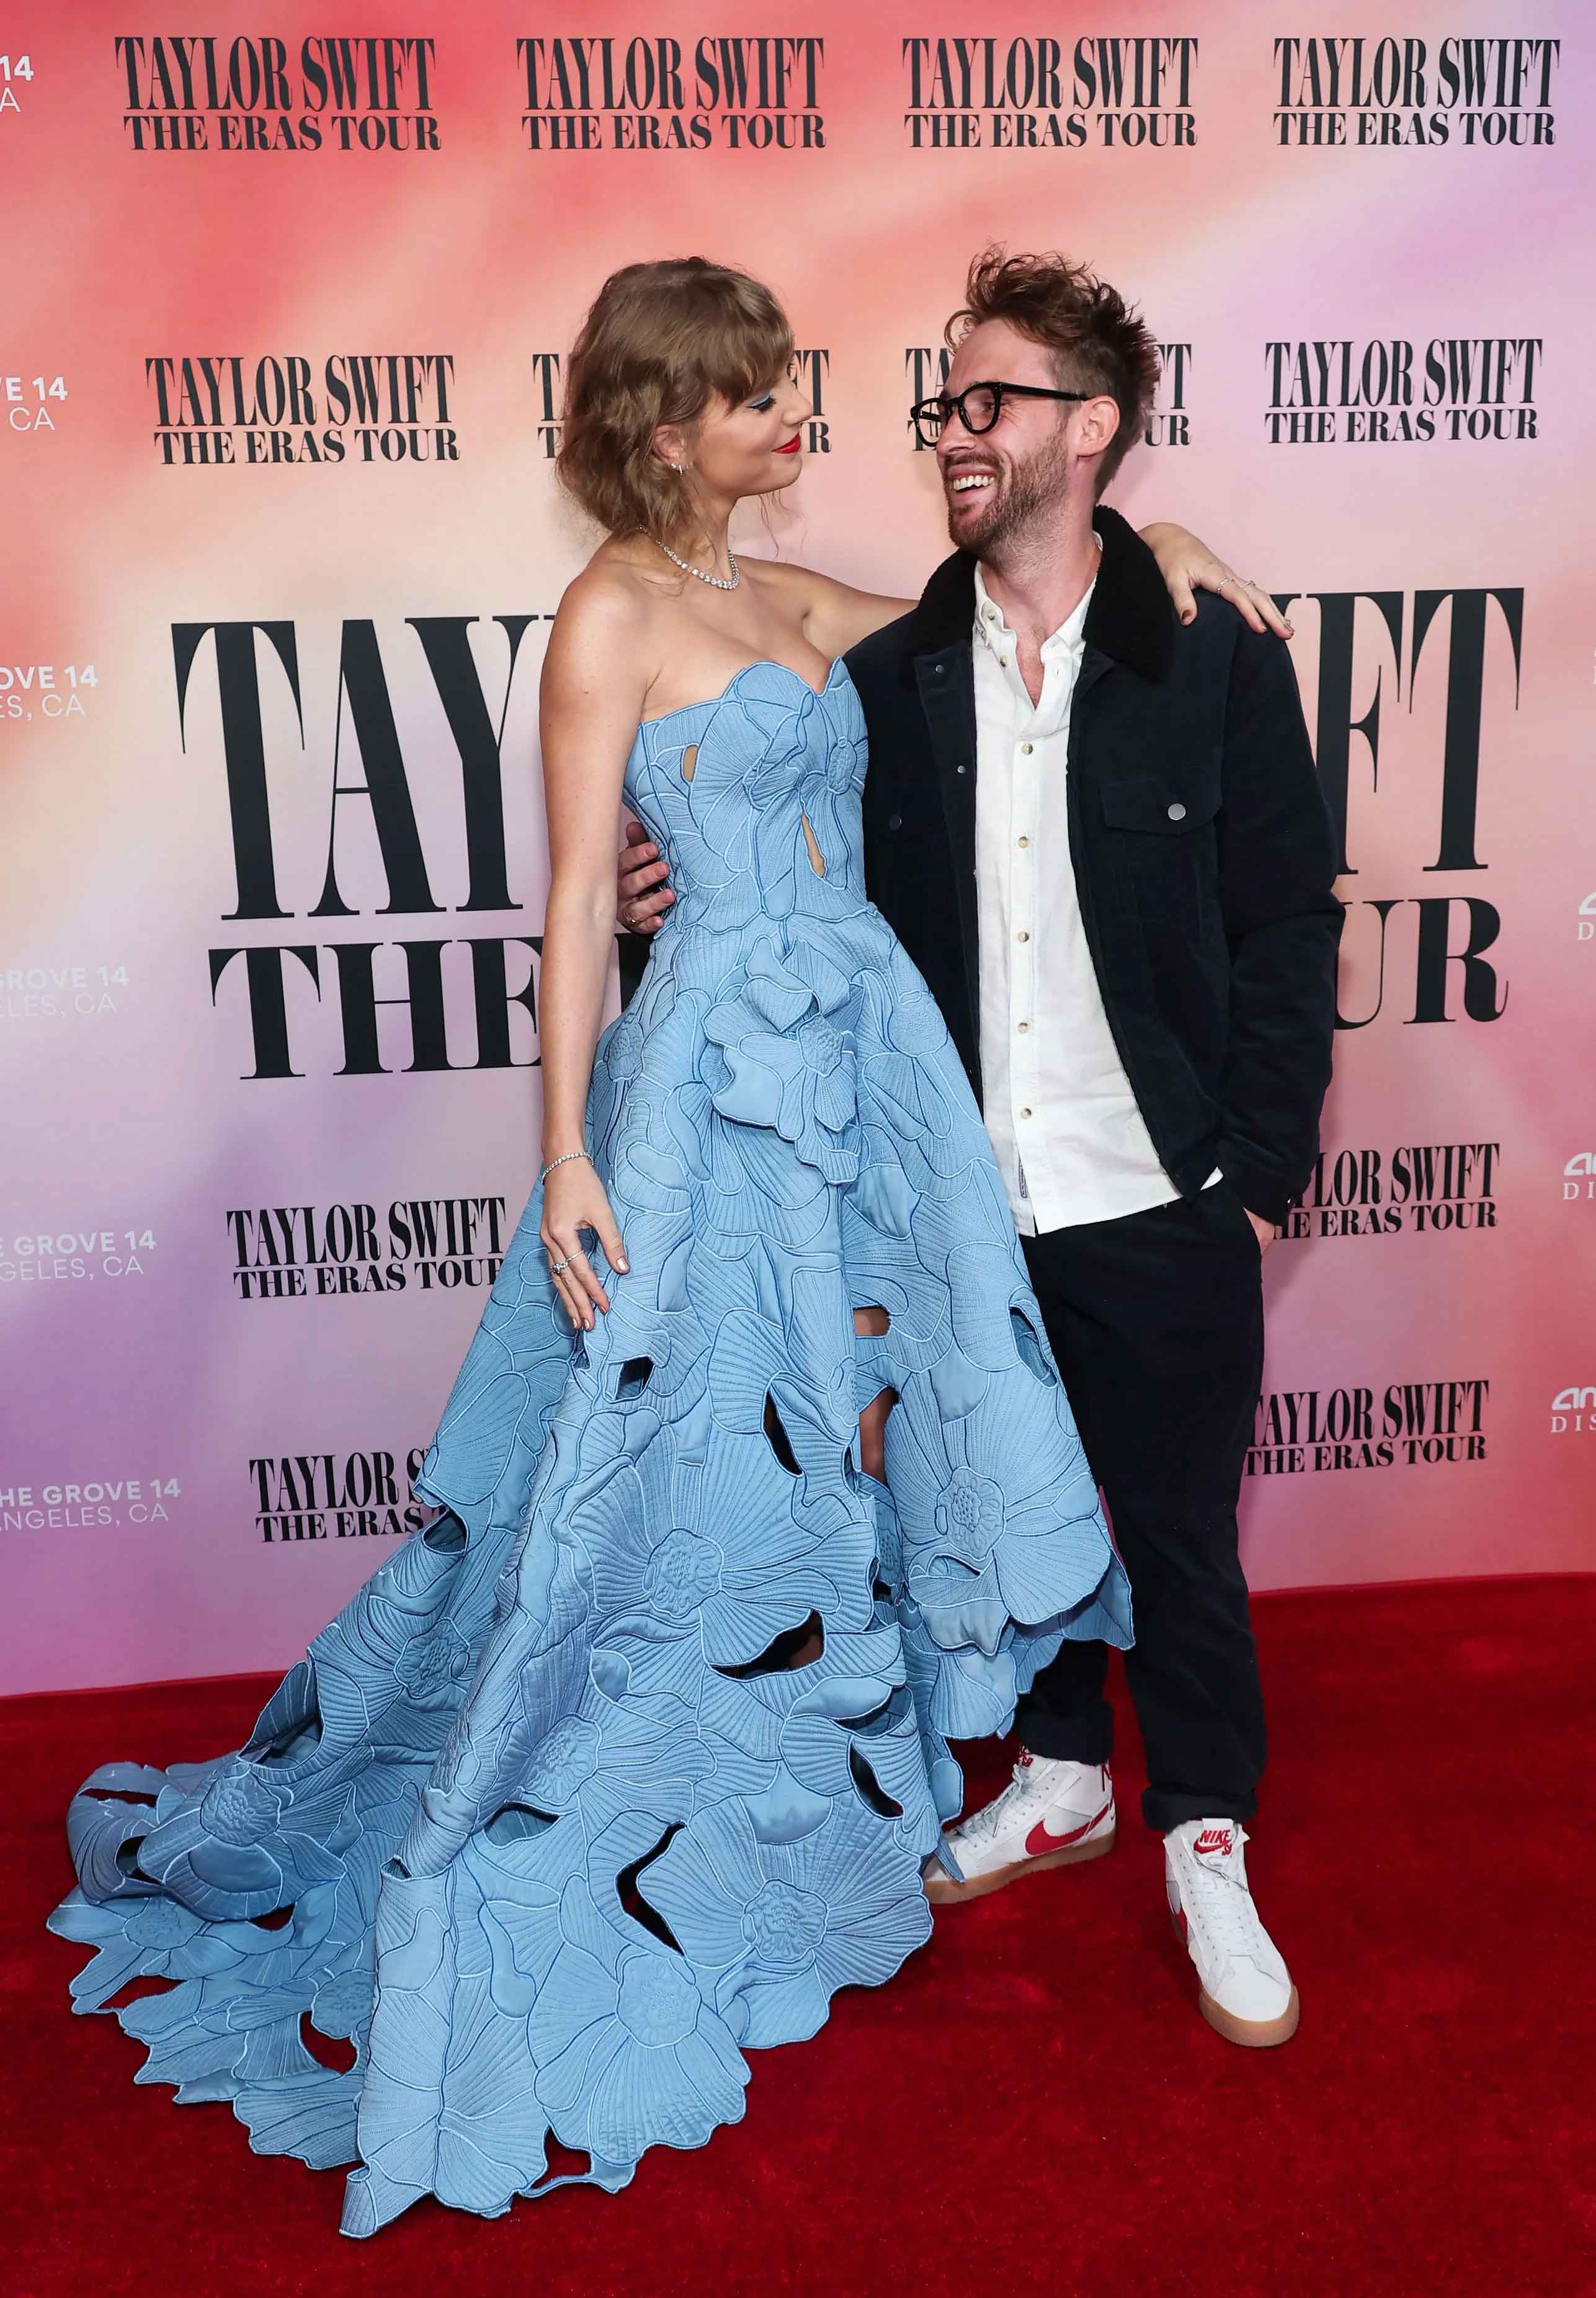 Taylor Swift posed with director Sam Wrench